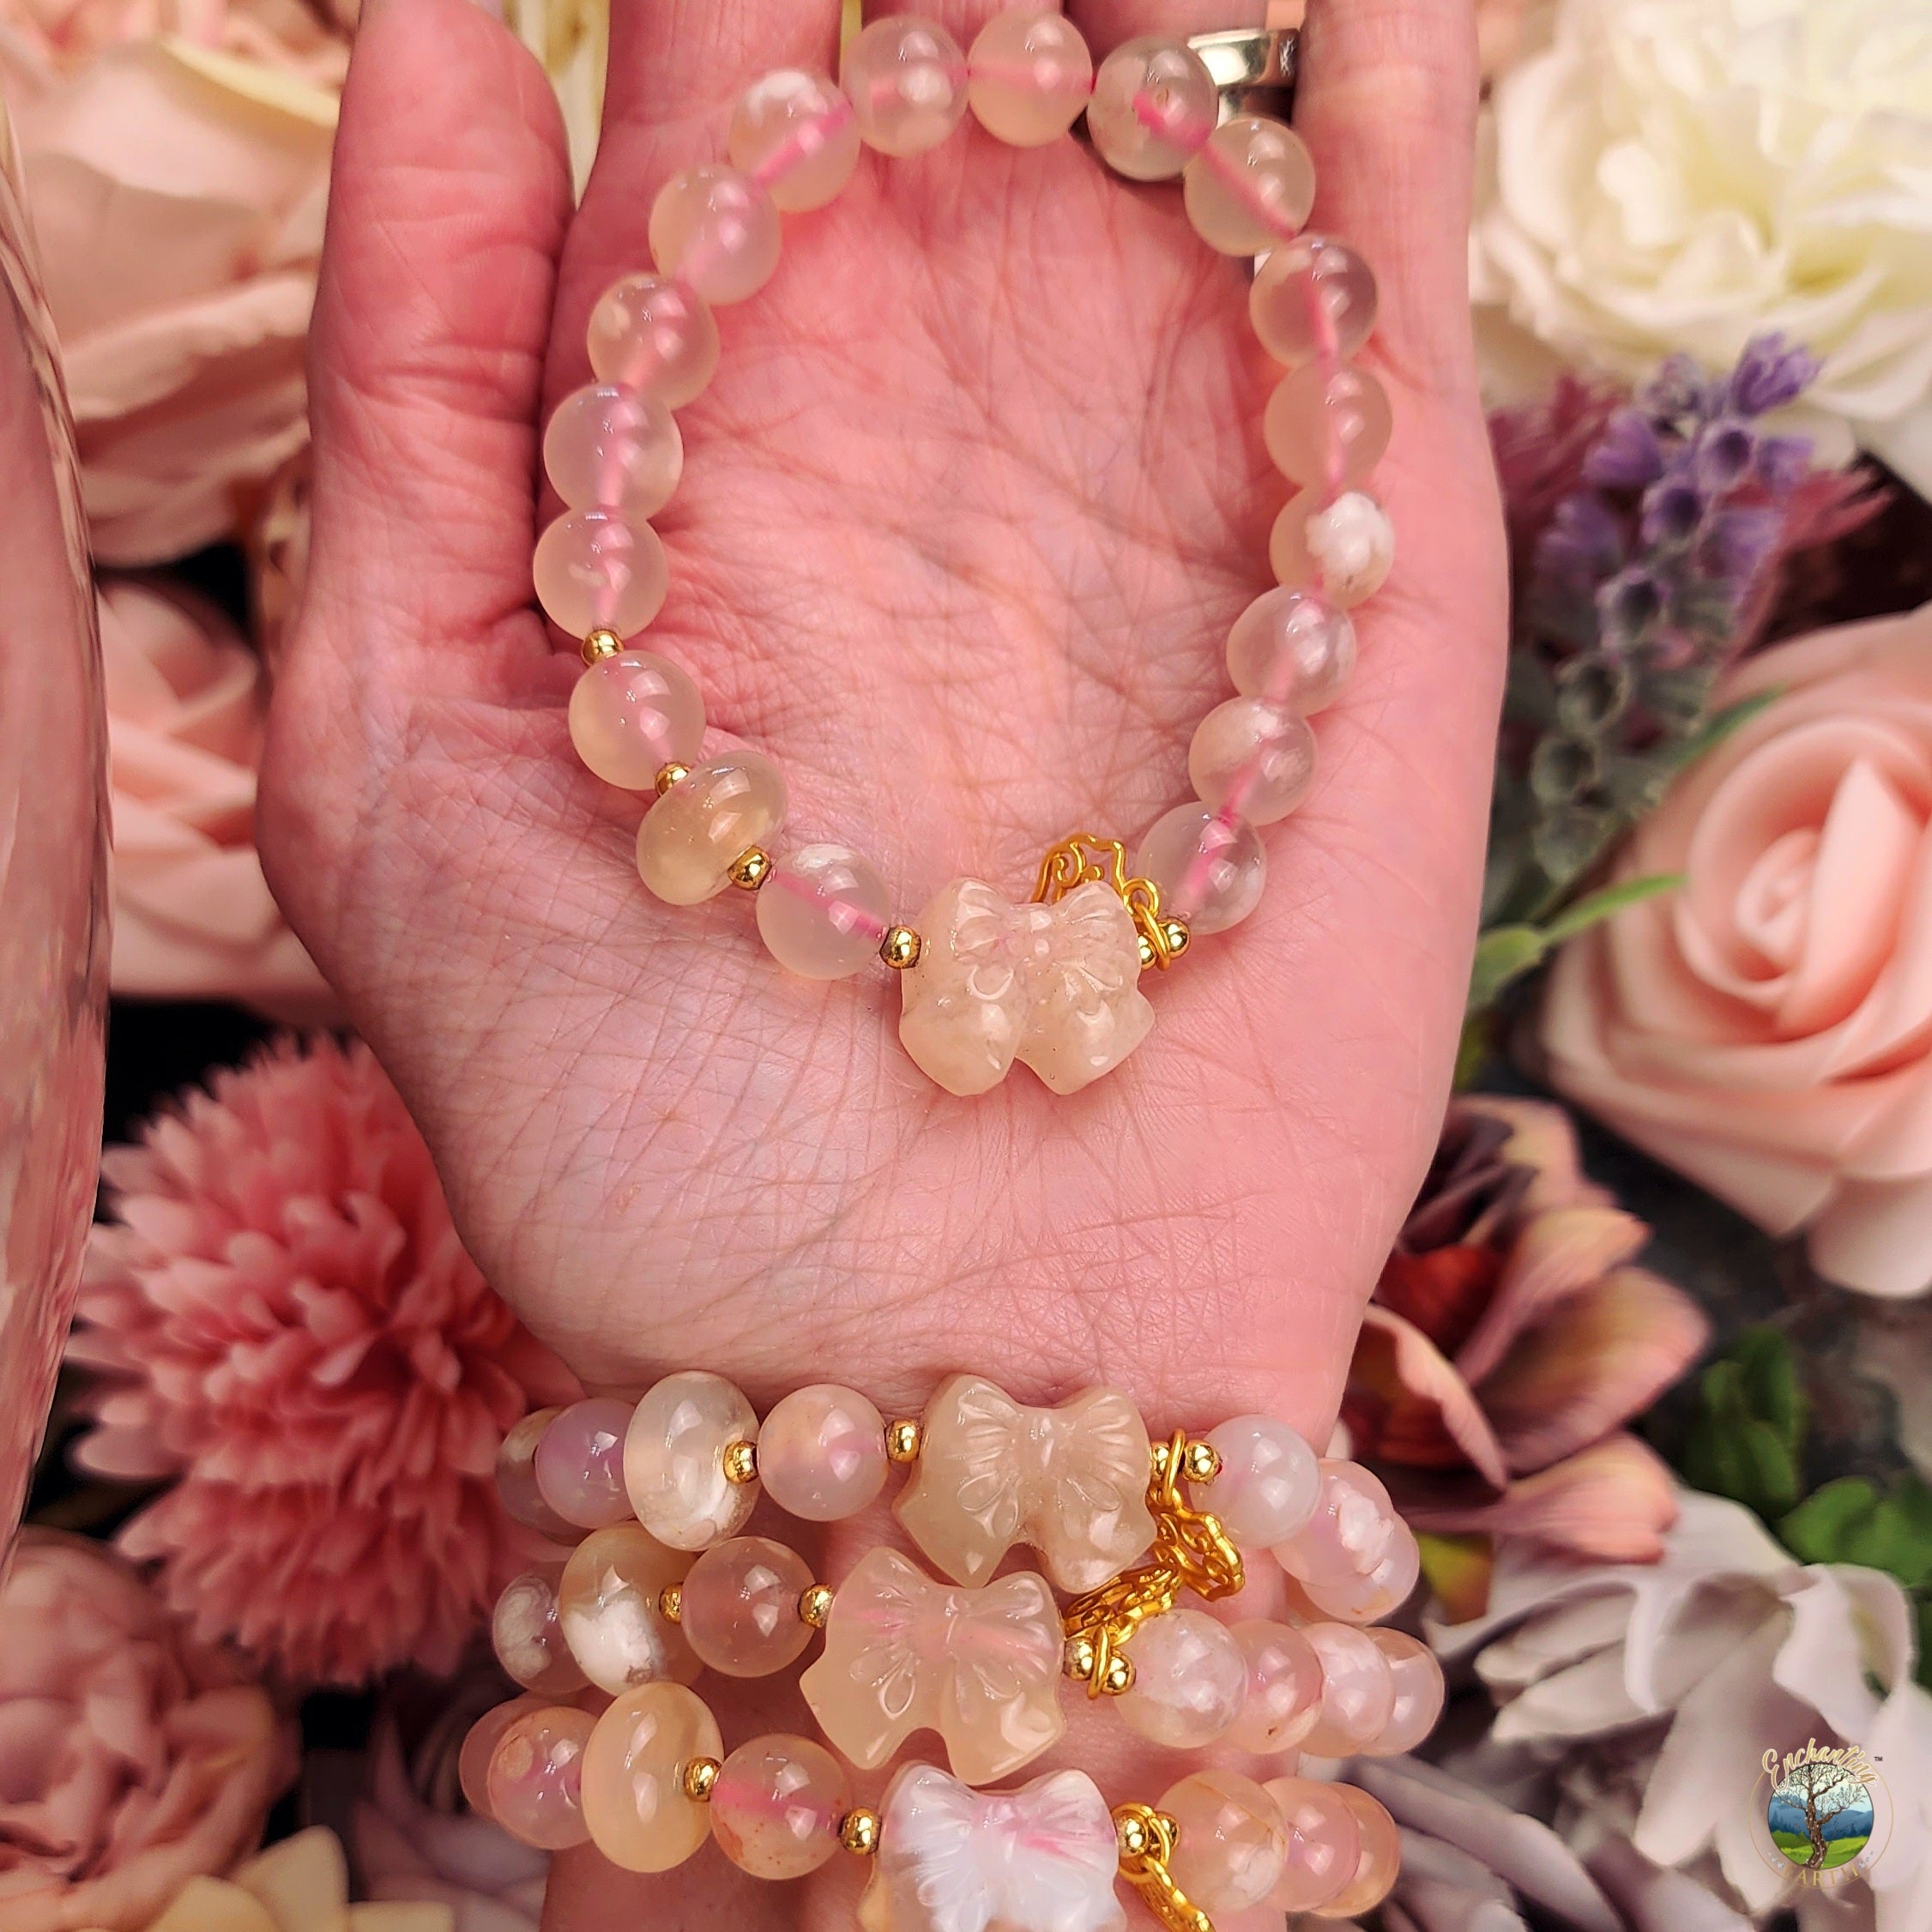 Flower Agate Bow Charm Bracelet for Blossoming into your Full Potential